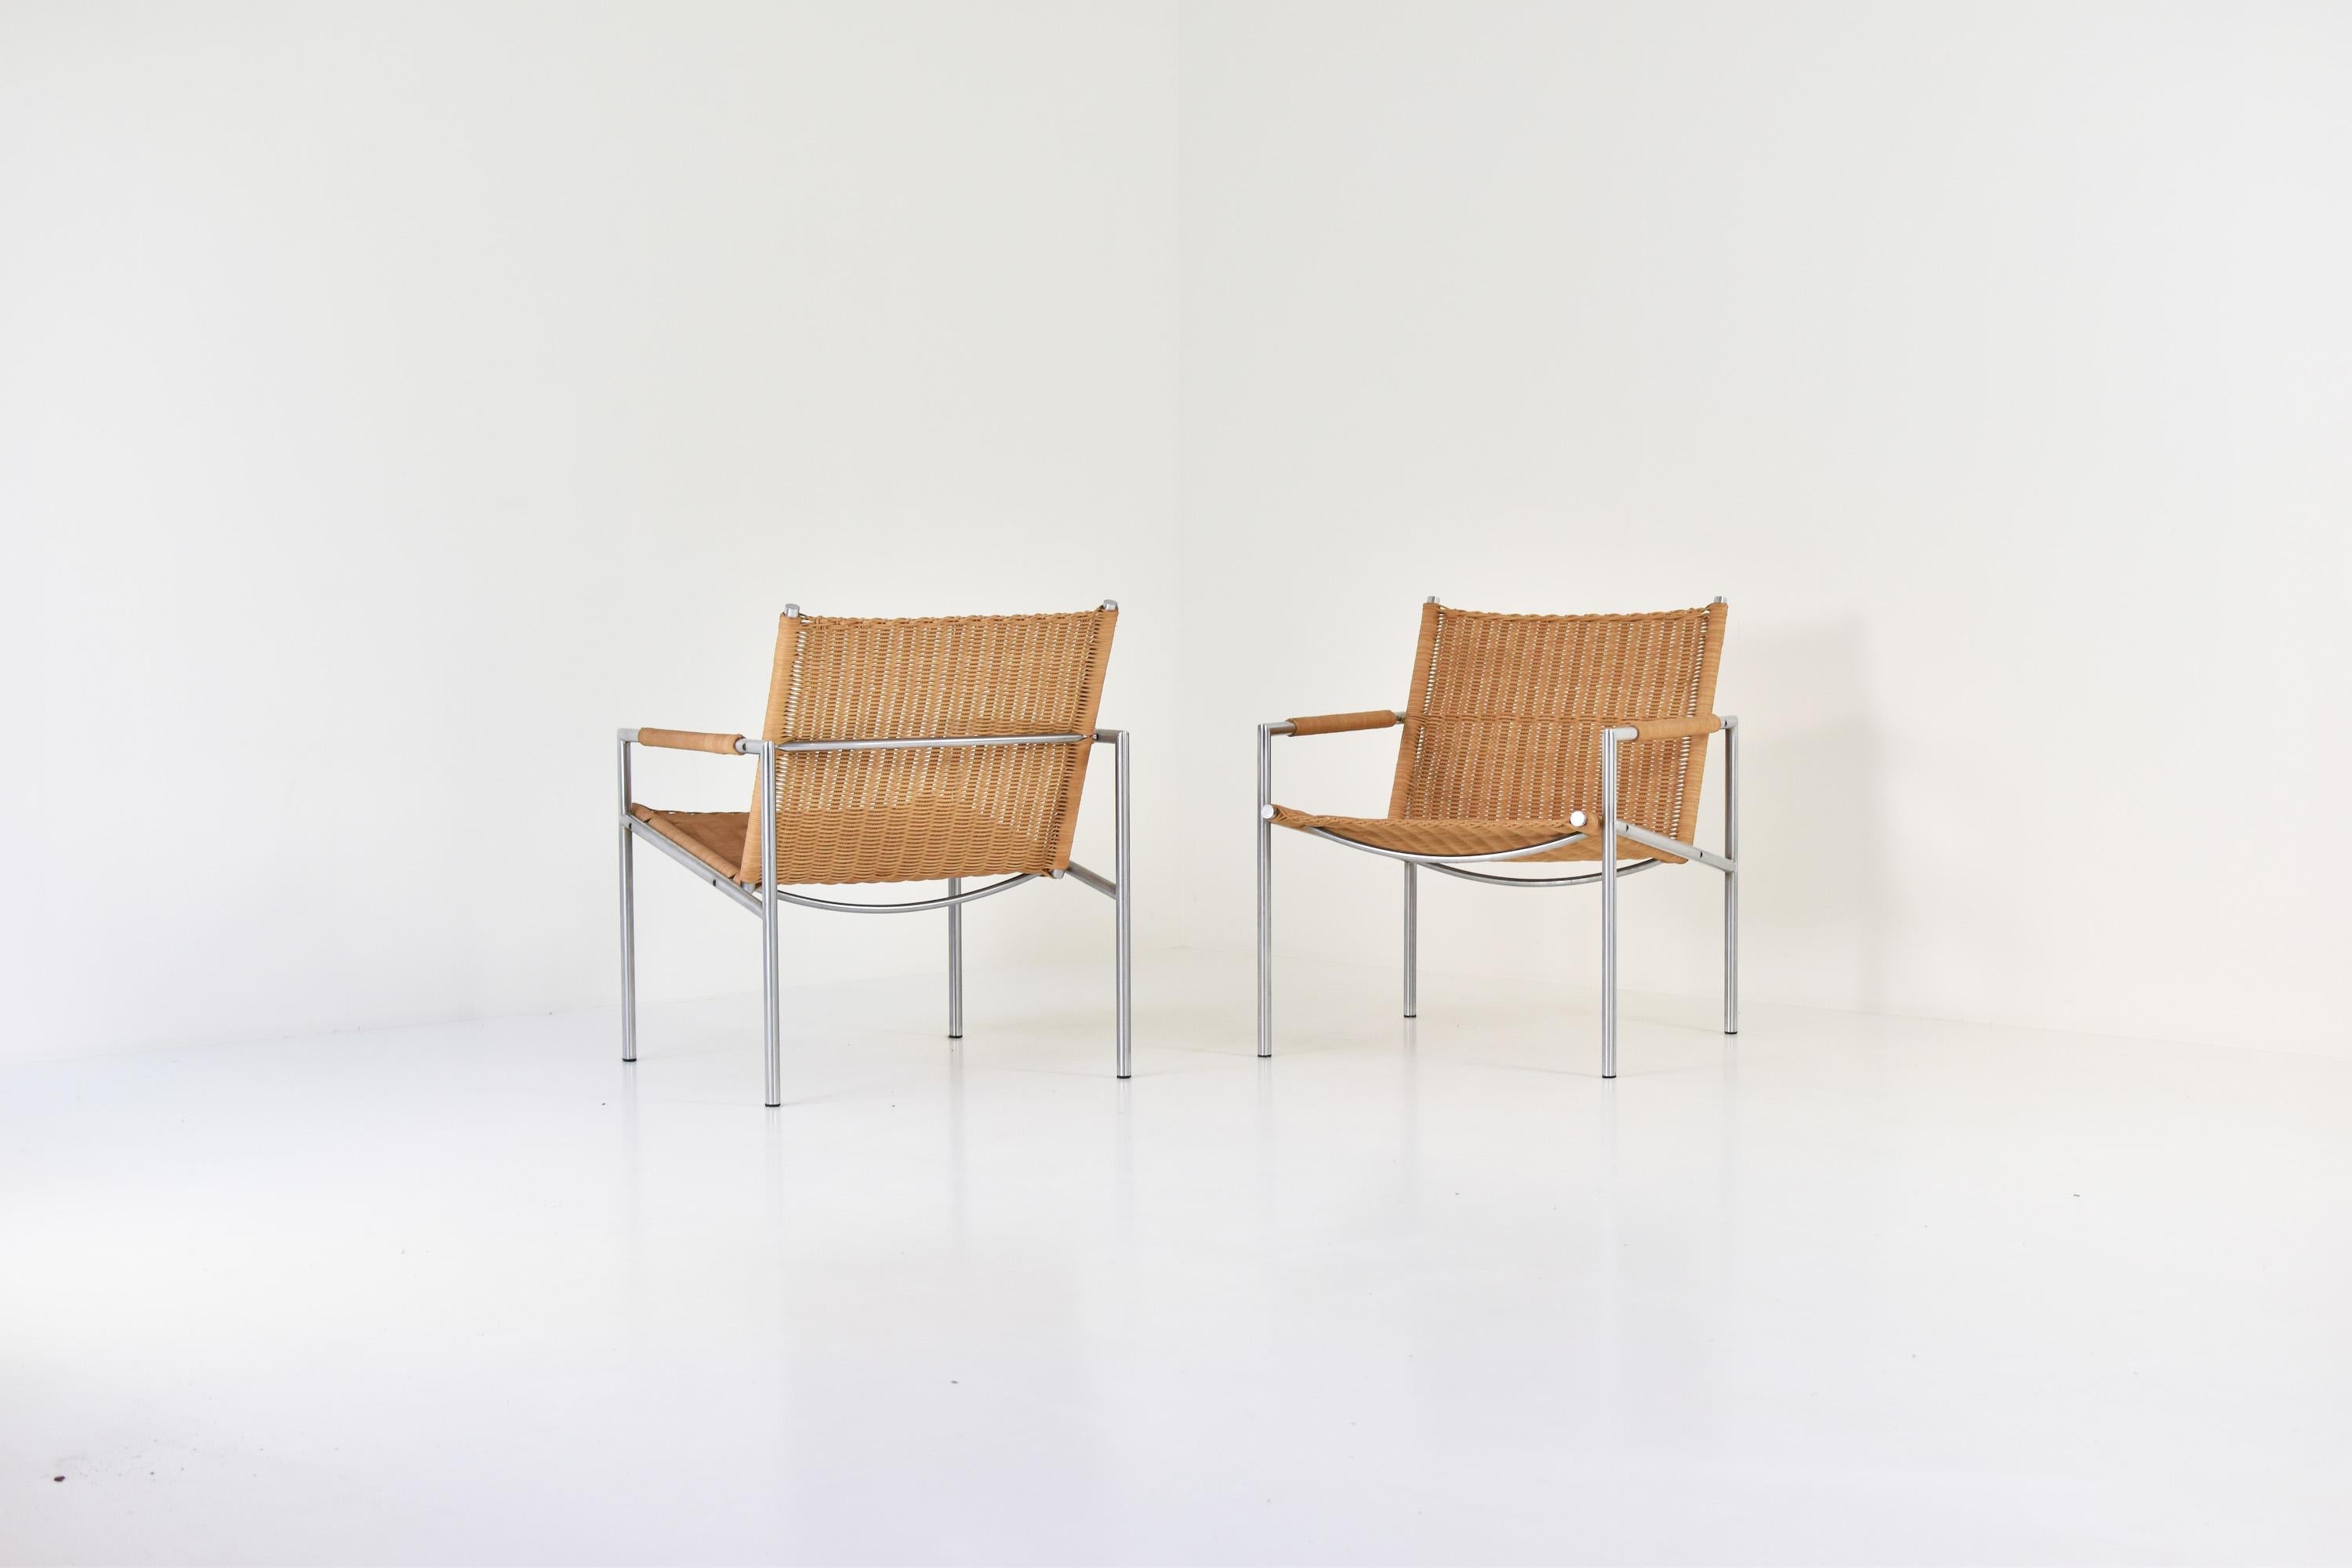 Set of 2 ‘SZ01’ easy chairs by Martin Visser for ‘t Spectrum, the Netherlands, 1960s. These chairs features a tubular brushed steel frame and wicker seats. Good original condition with only minor wear. Very modern and elegant design.